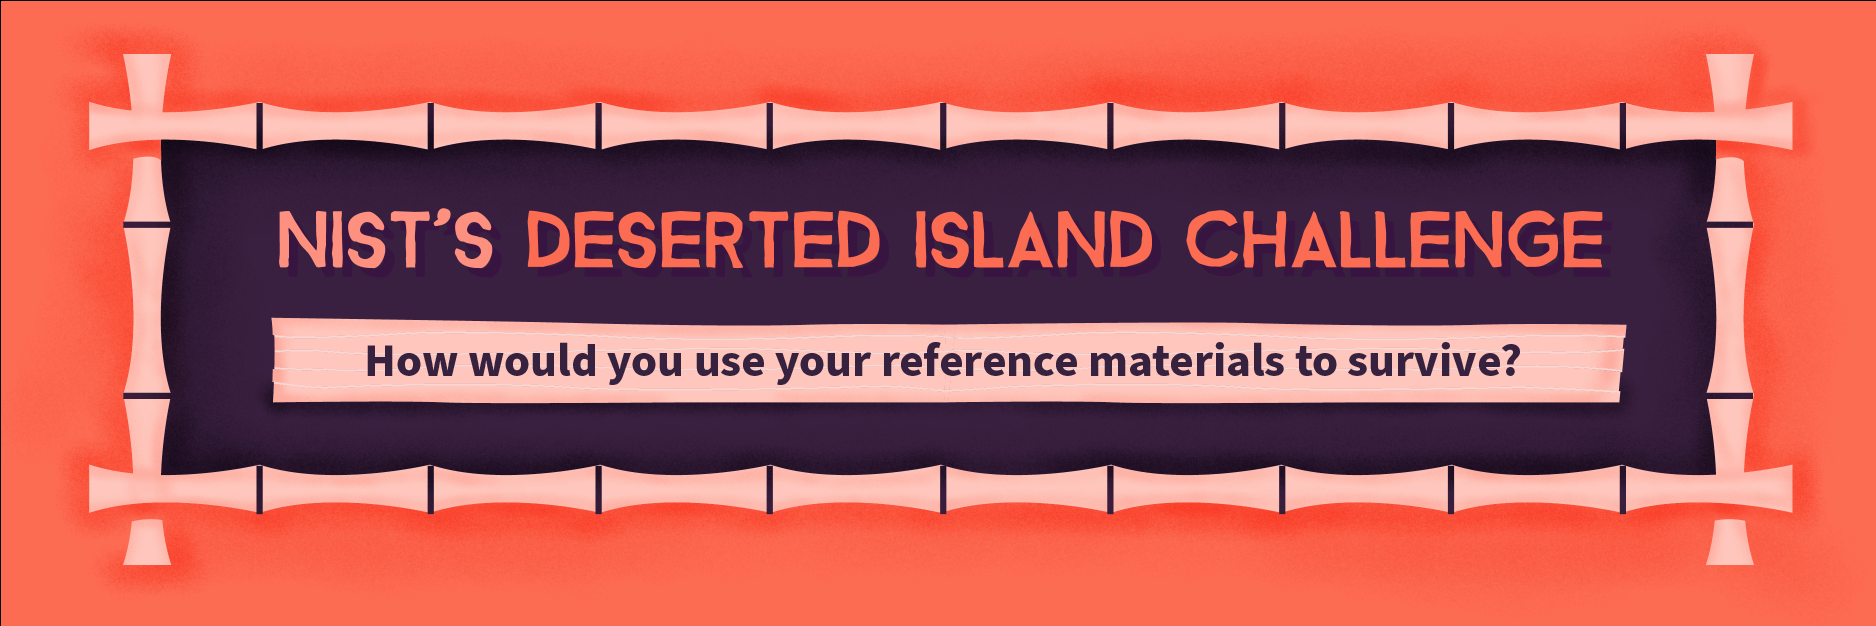 NIST's Deserted Island Challenge: How would you use your reference materials to survive? 